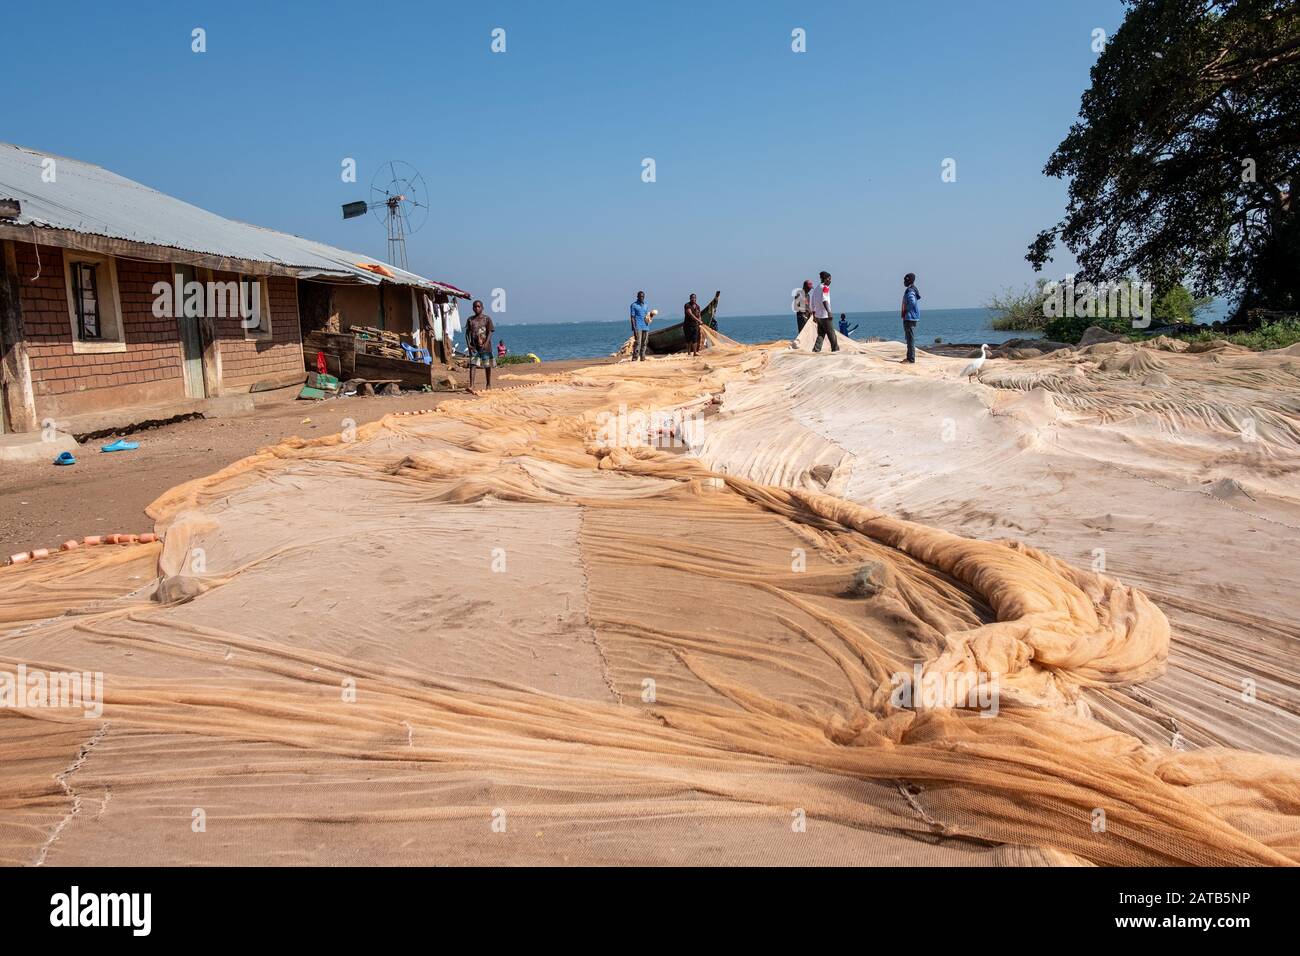 Fisherman stretch out a fishing net to dry in the sun in a Kenyan village on the shores of Lake Victoria, East Africa Stock Photo